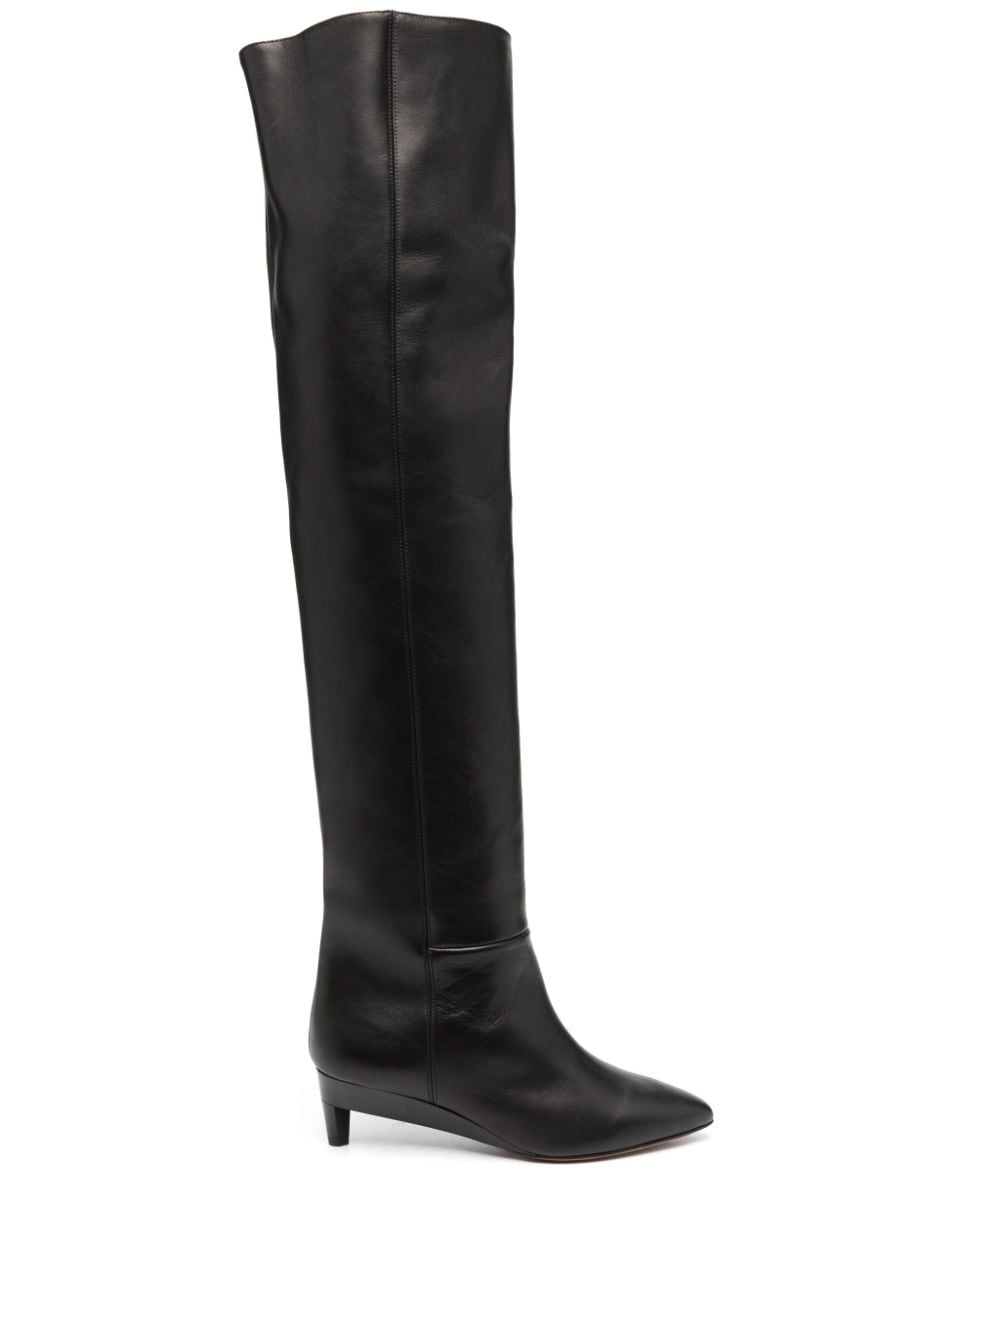 ISABEL MARANT LISALI 50MM LEATHER THIGH-HIGH BOOTS